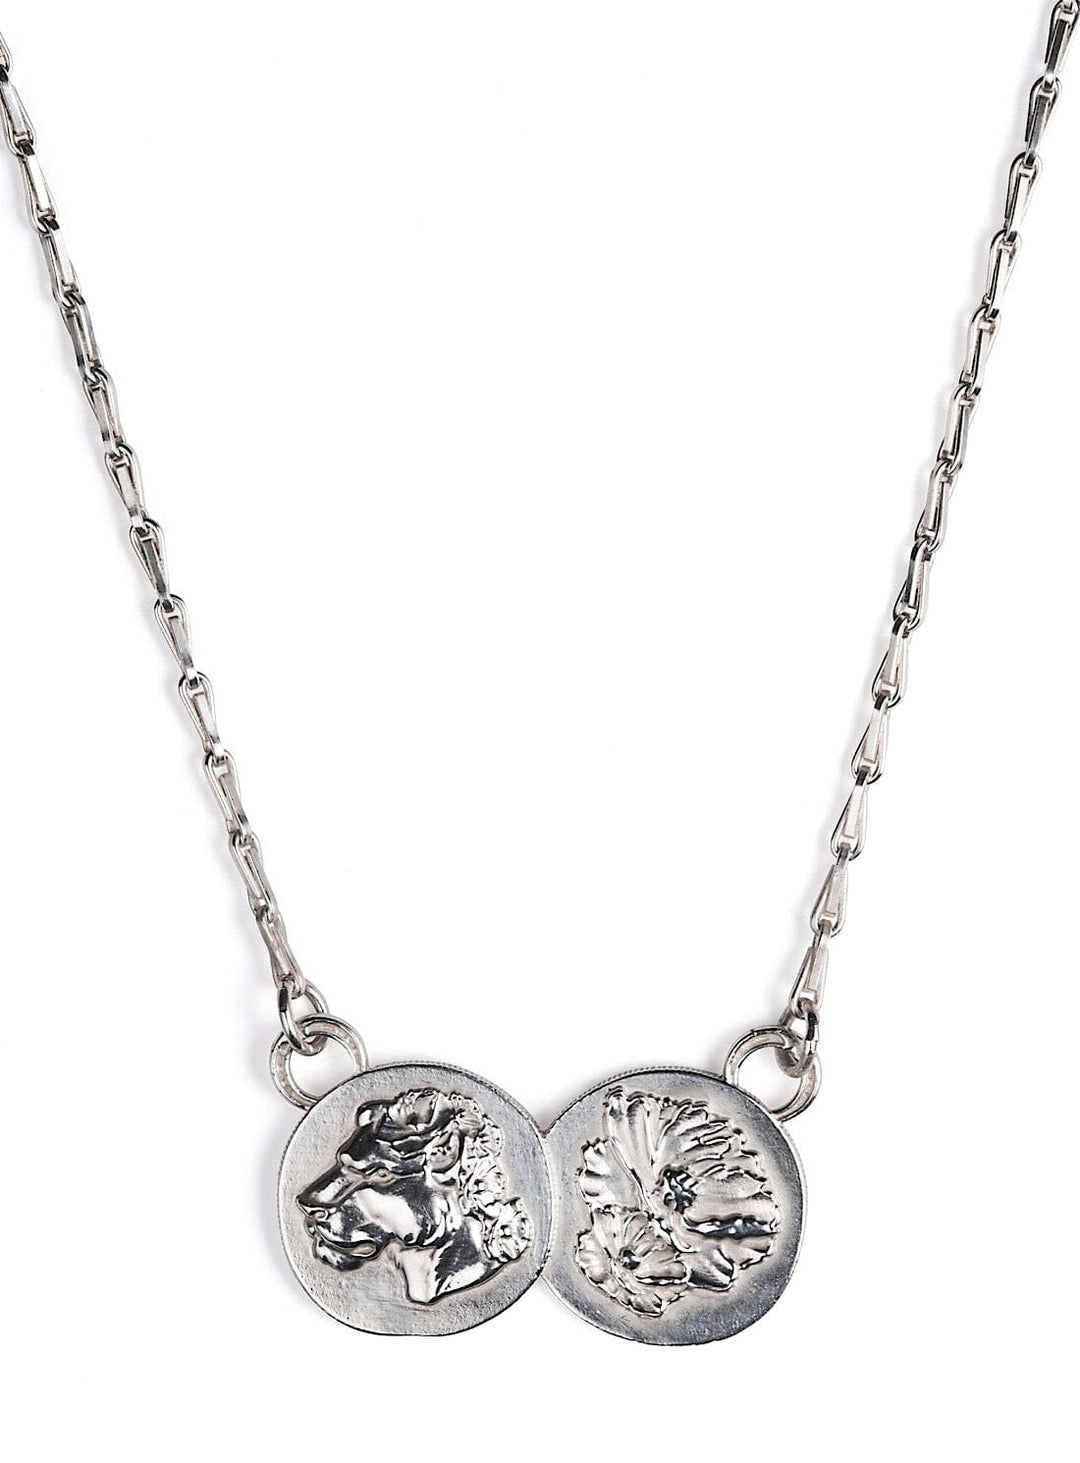 Silver Lioness Double Coin Pendant Necklaces YBDFinds 